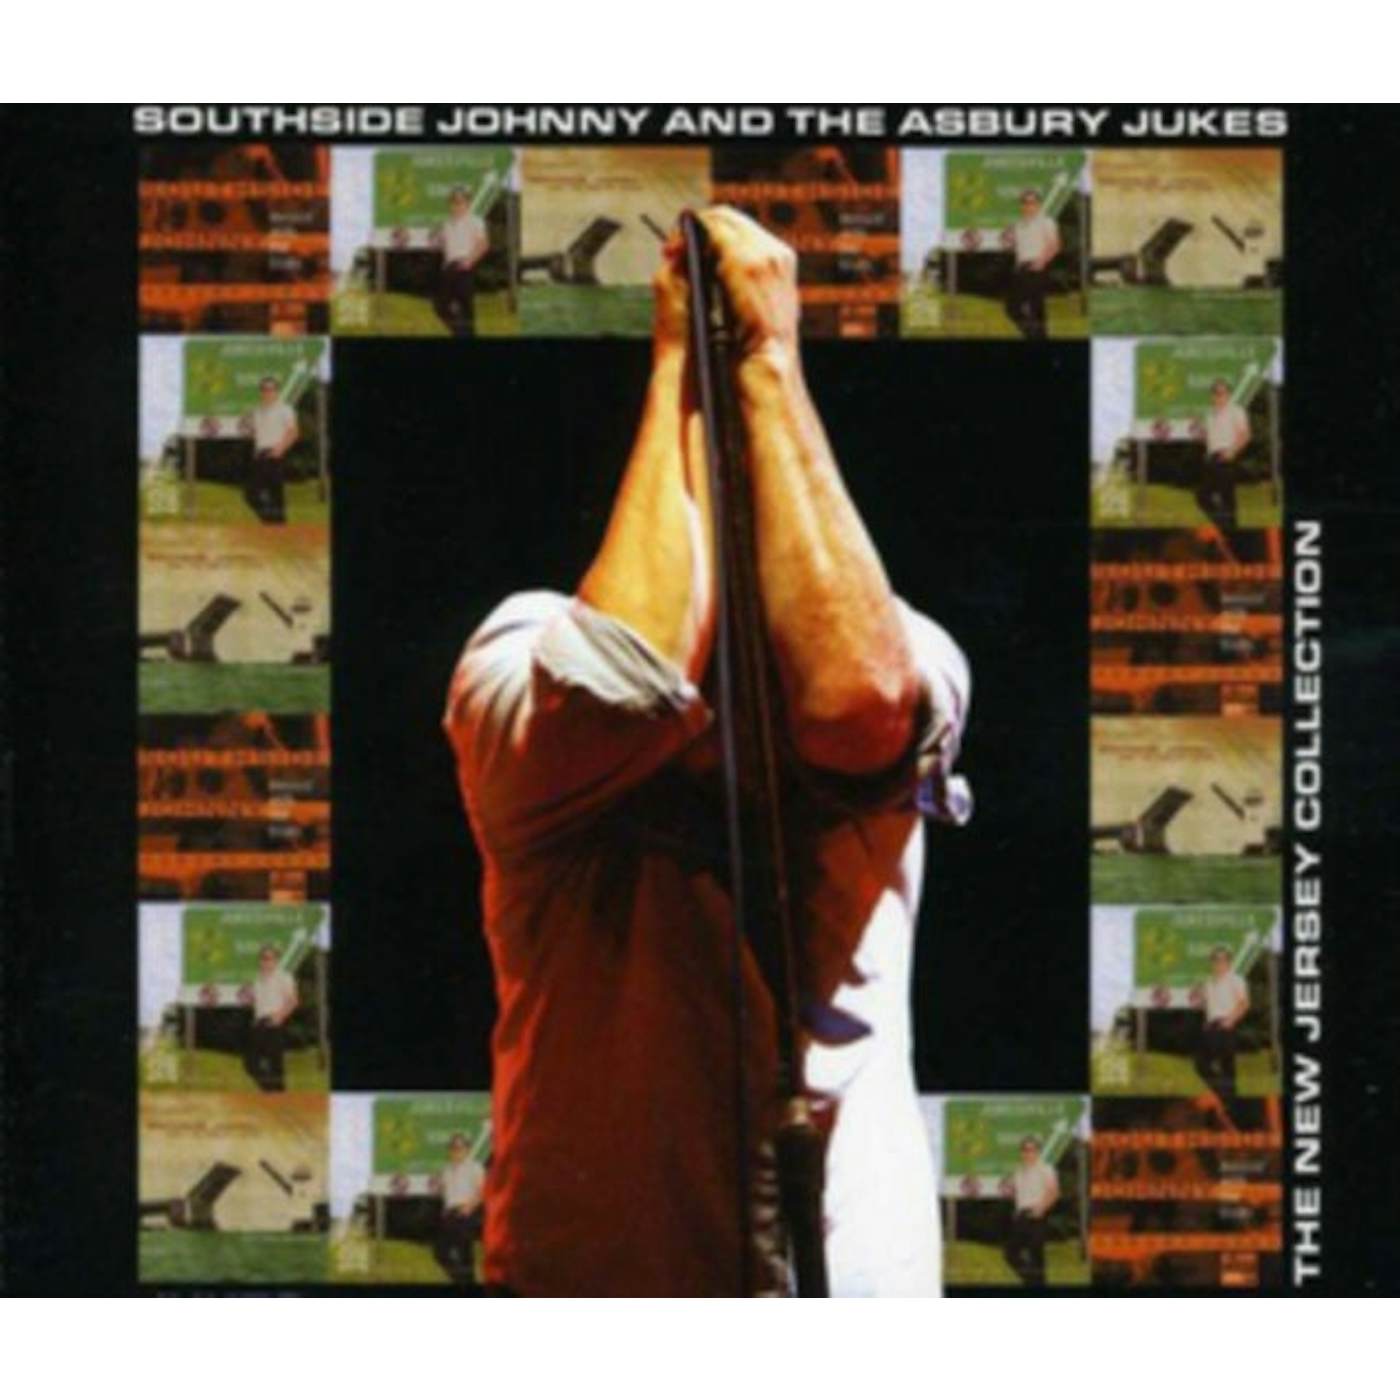 Southside Johnny And The Asbury JukesCD - Jukes - The New Jersey Collection